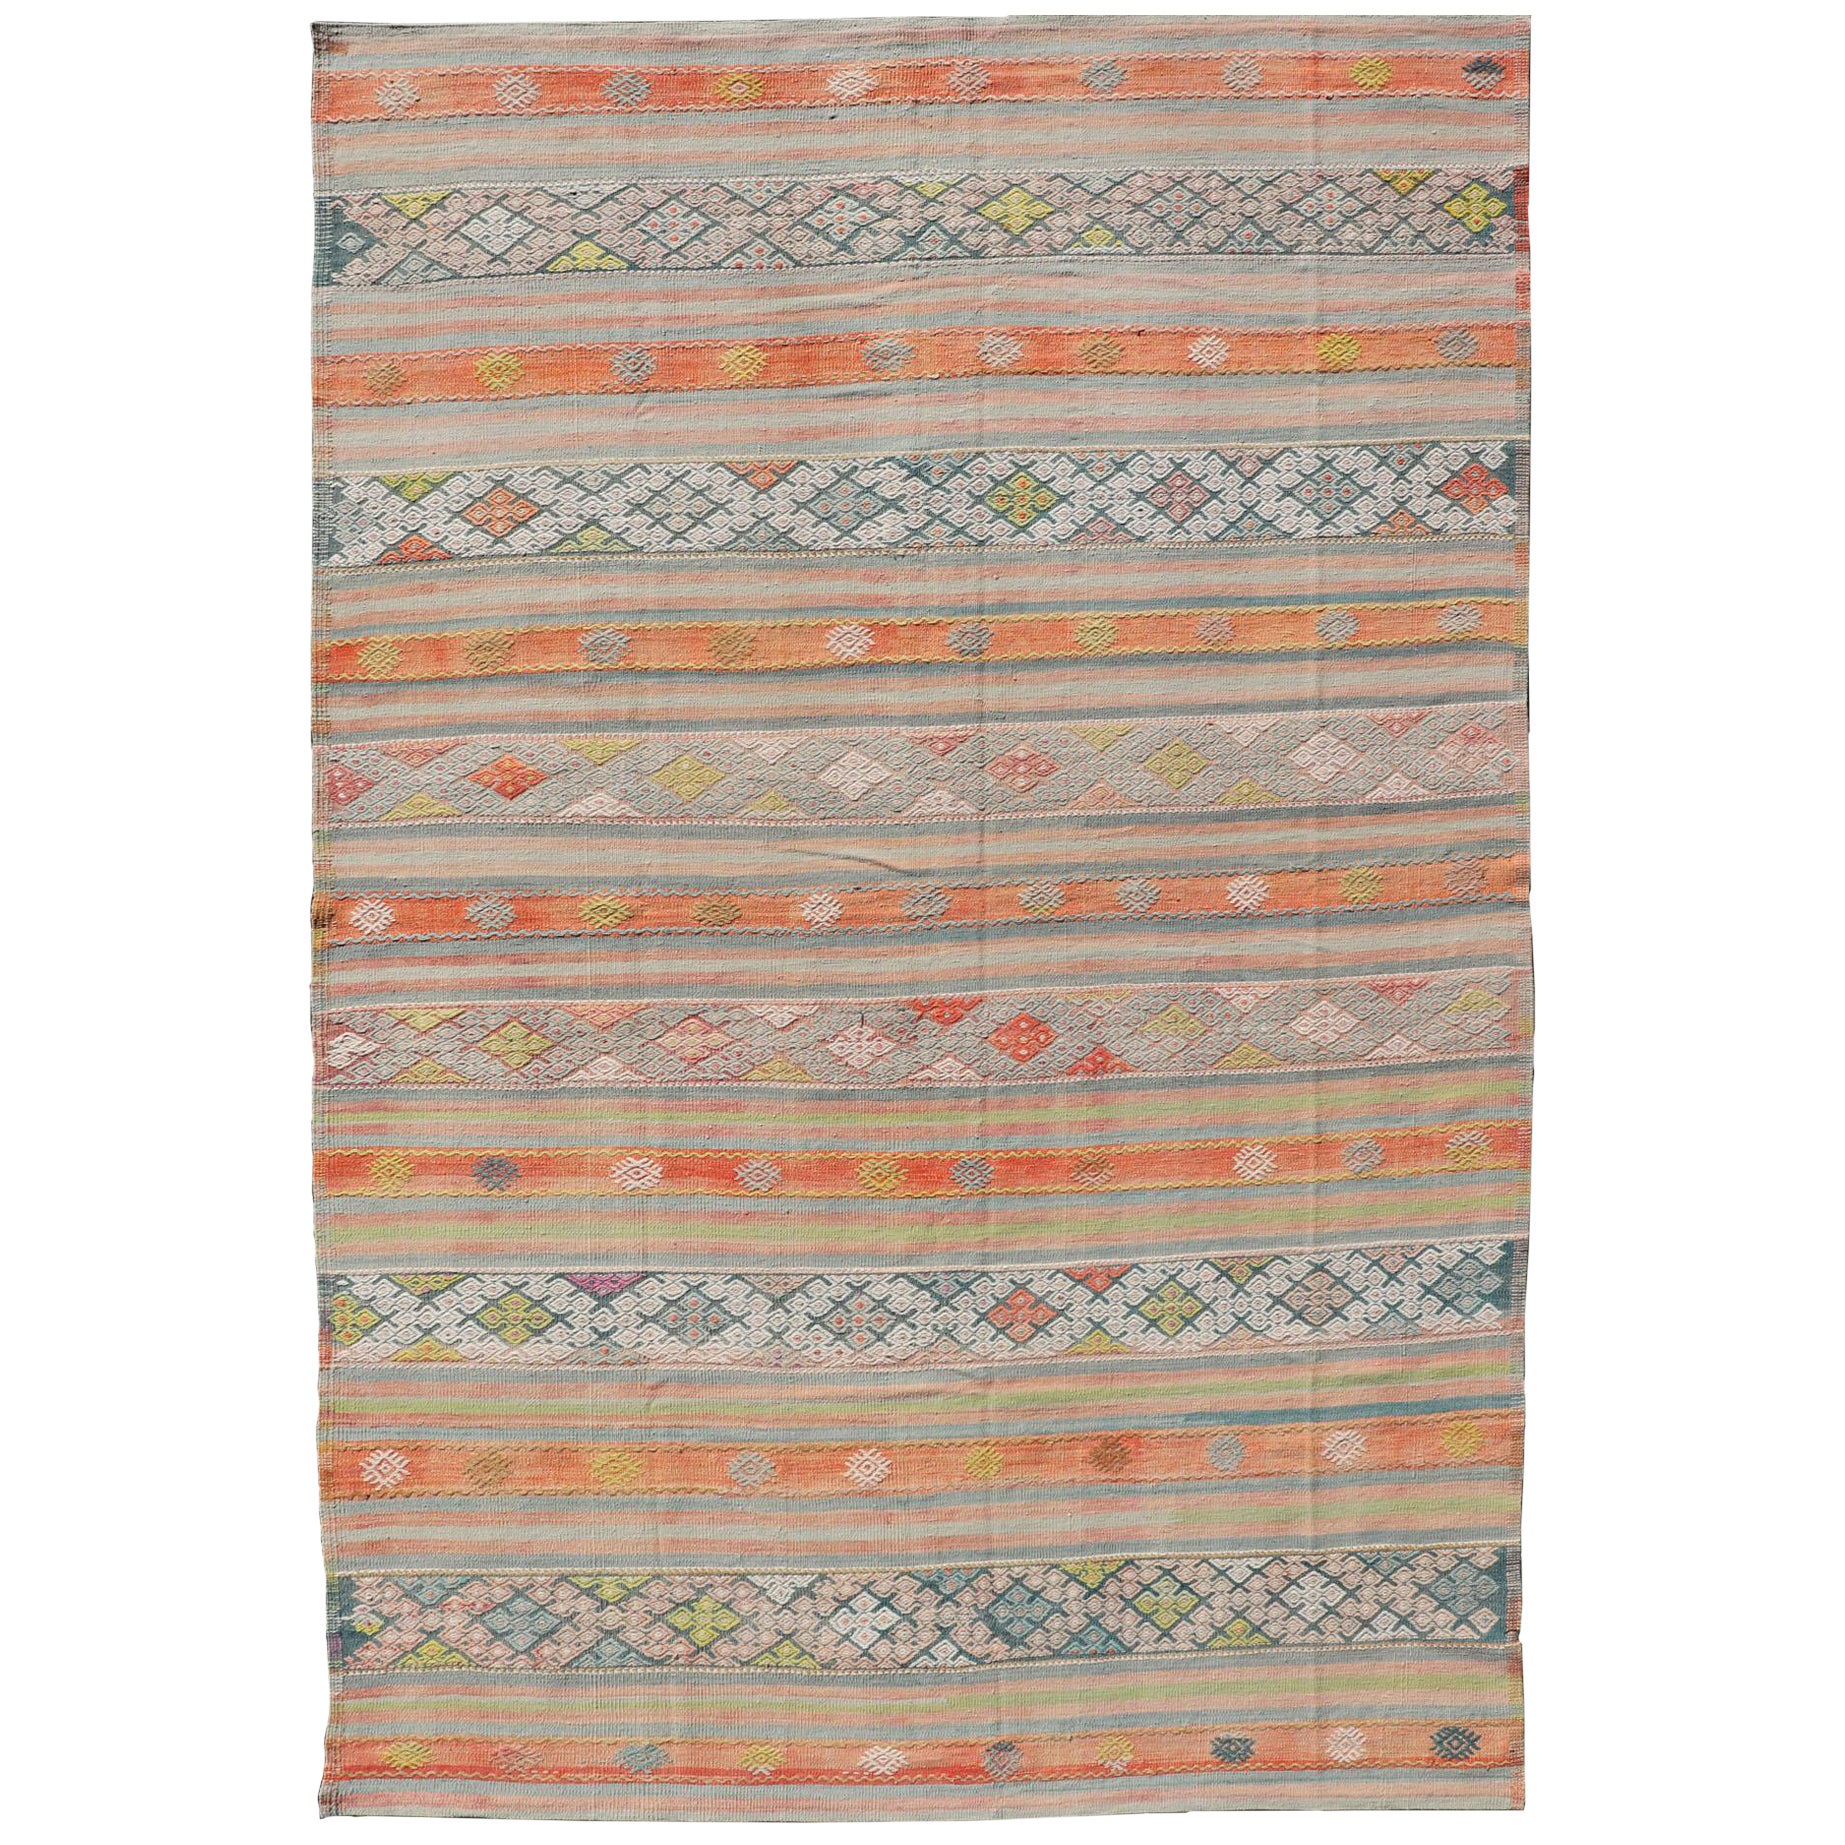 Colorful Vintage Turkish Embroidered Kilim With Stripe's and Geometric Motifs For Sale